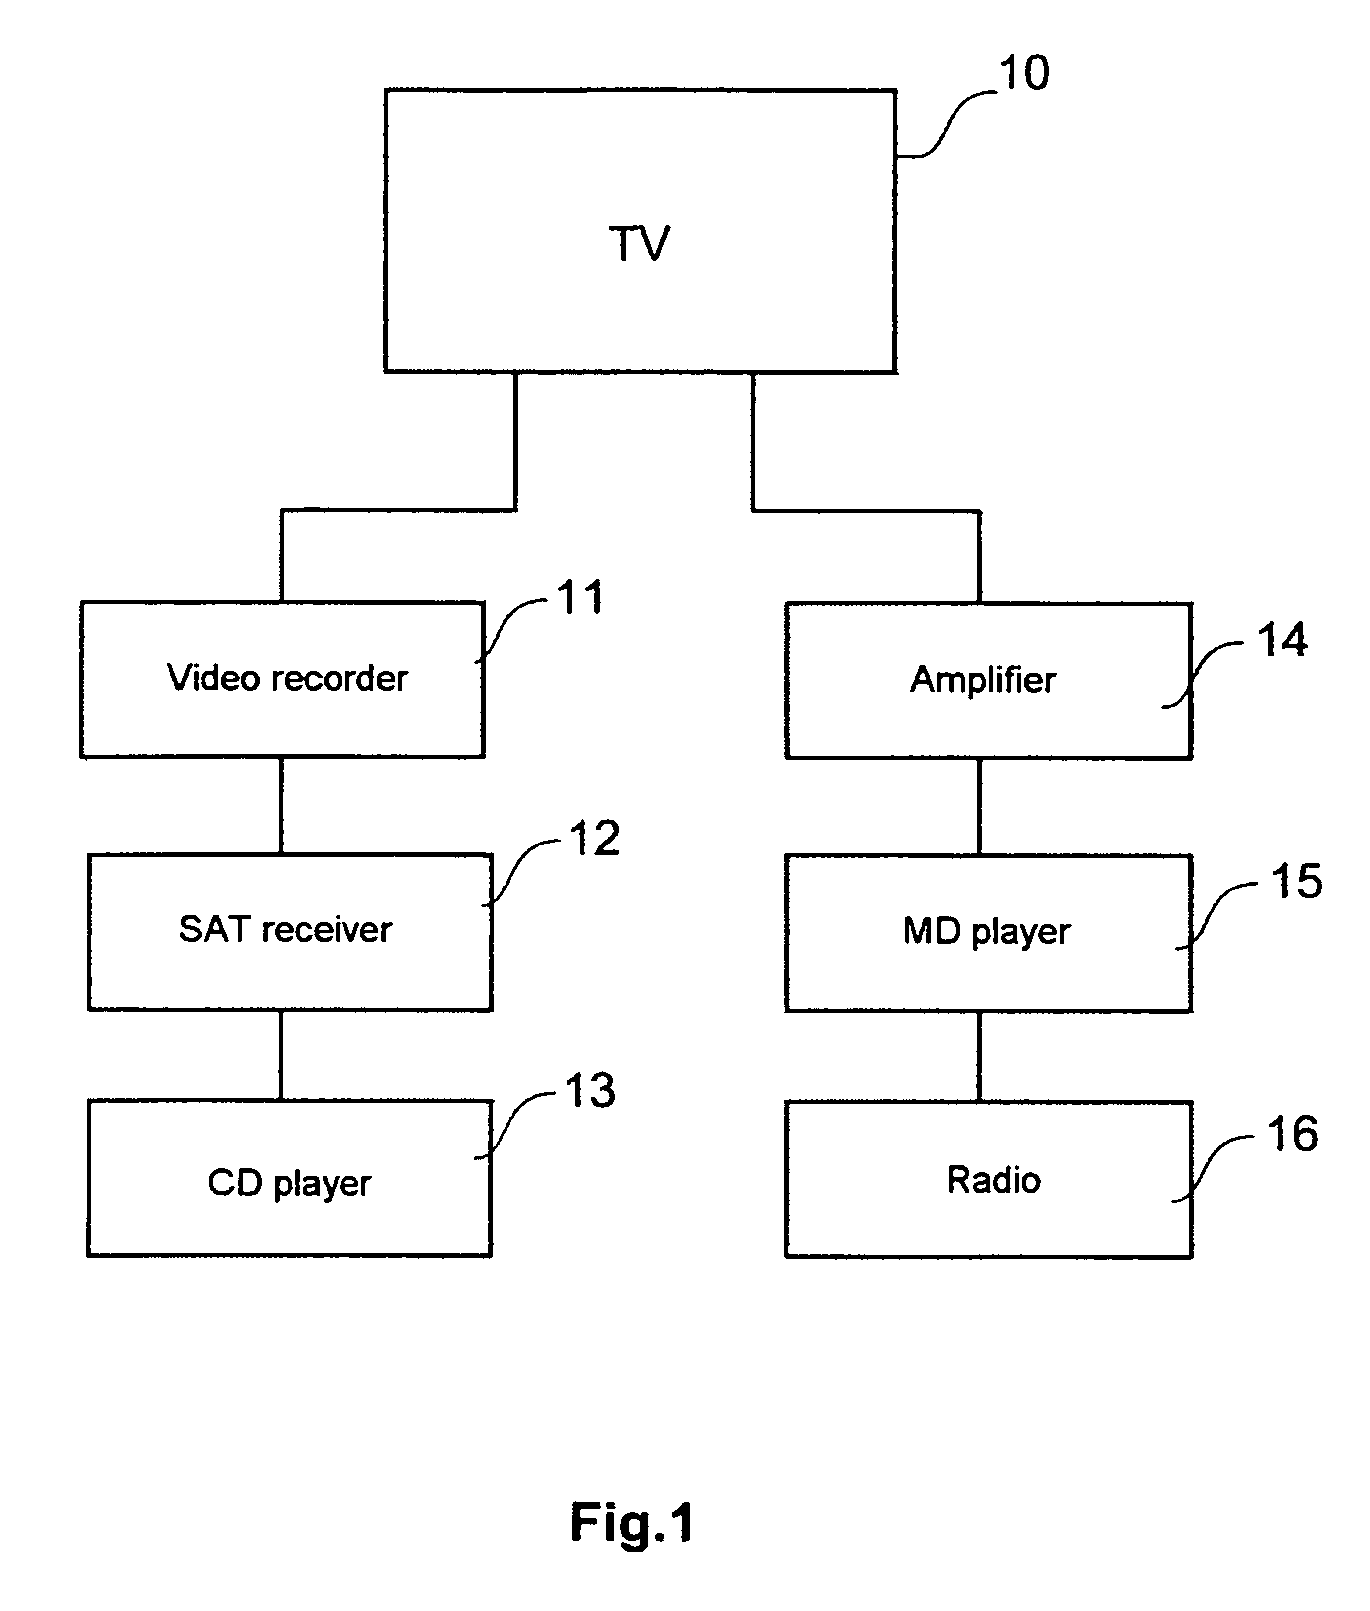 Method for providing a user interface for controlling an appliance in a network of distributed stations, as well as a network appliance for carrying out the method